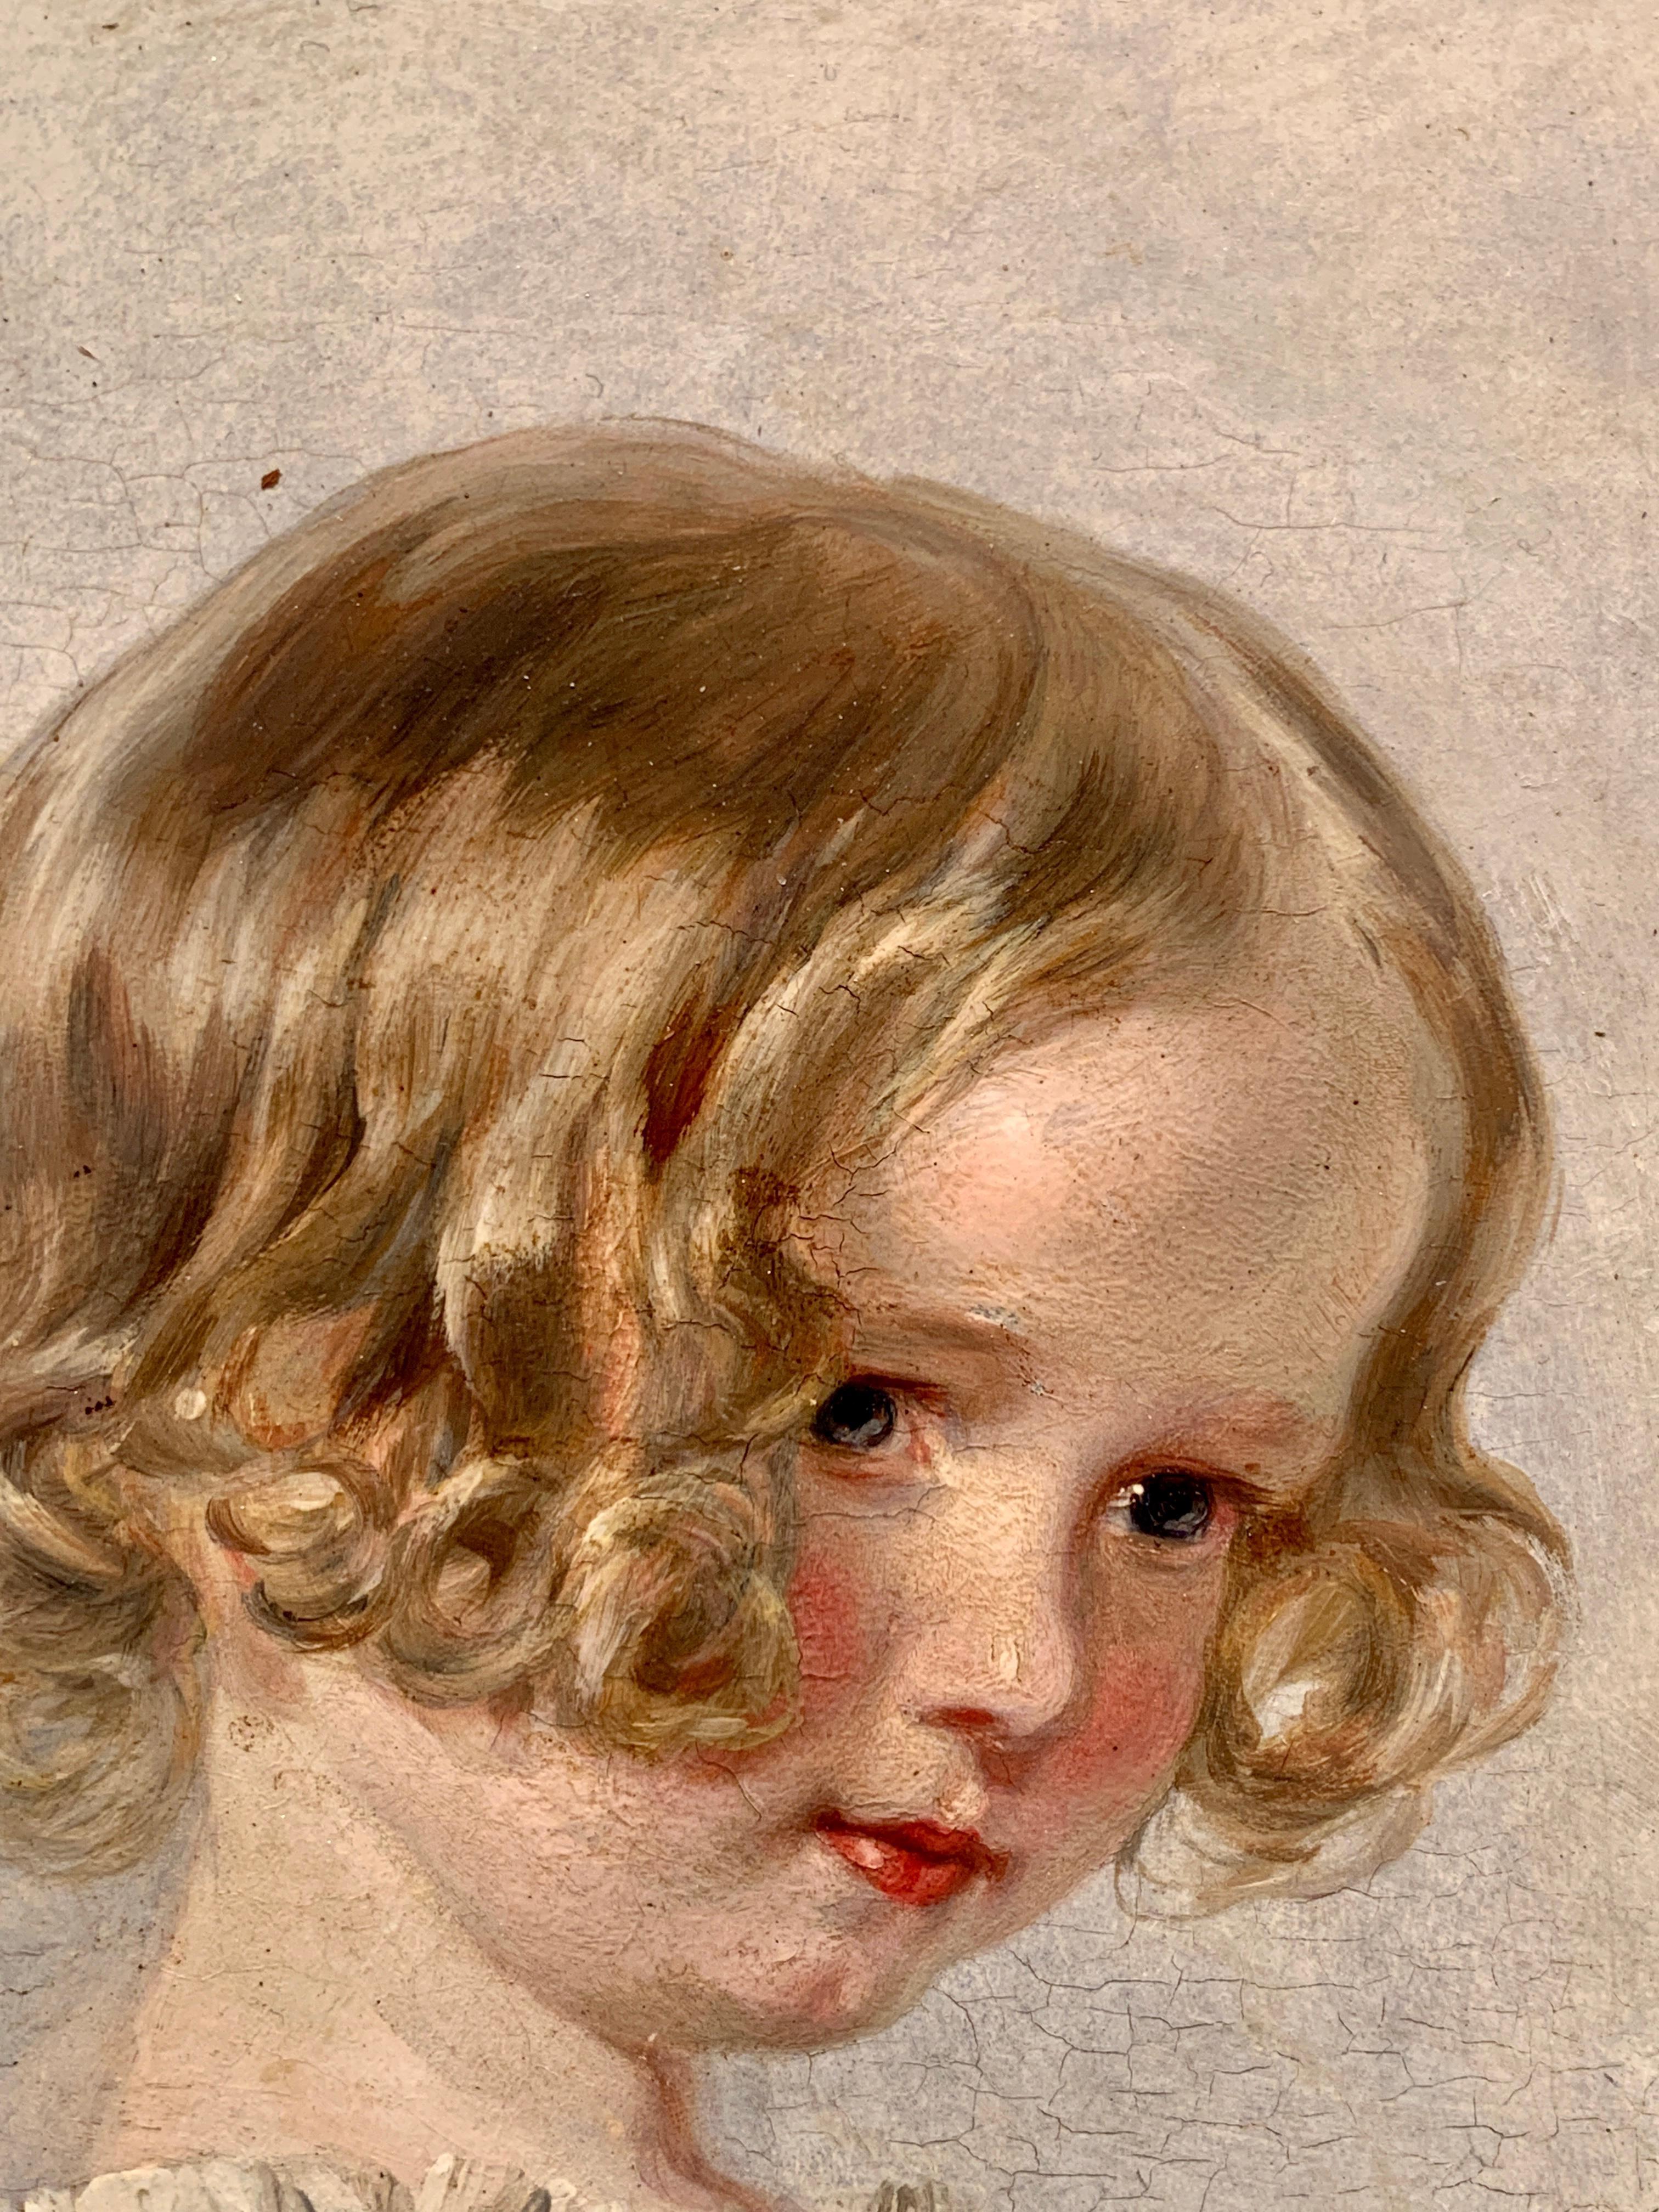 Antique 19th century English Victorian portrait of a blond haired young girl - Brown Portrait Painting by Charles Robert Leslie R.A.